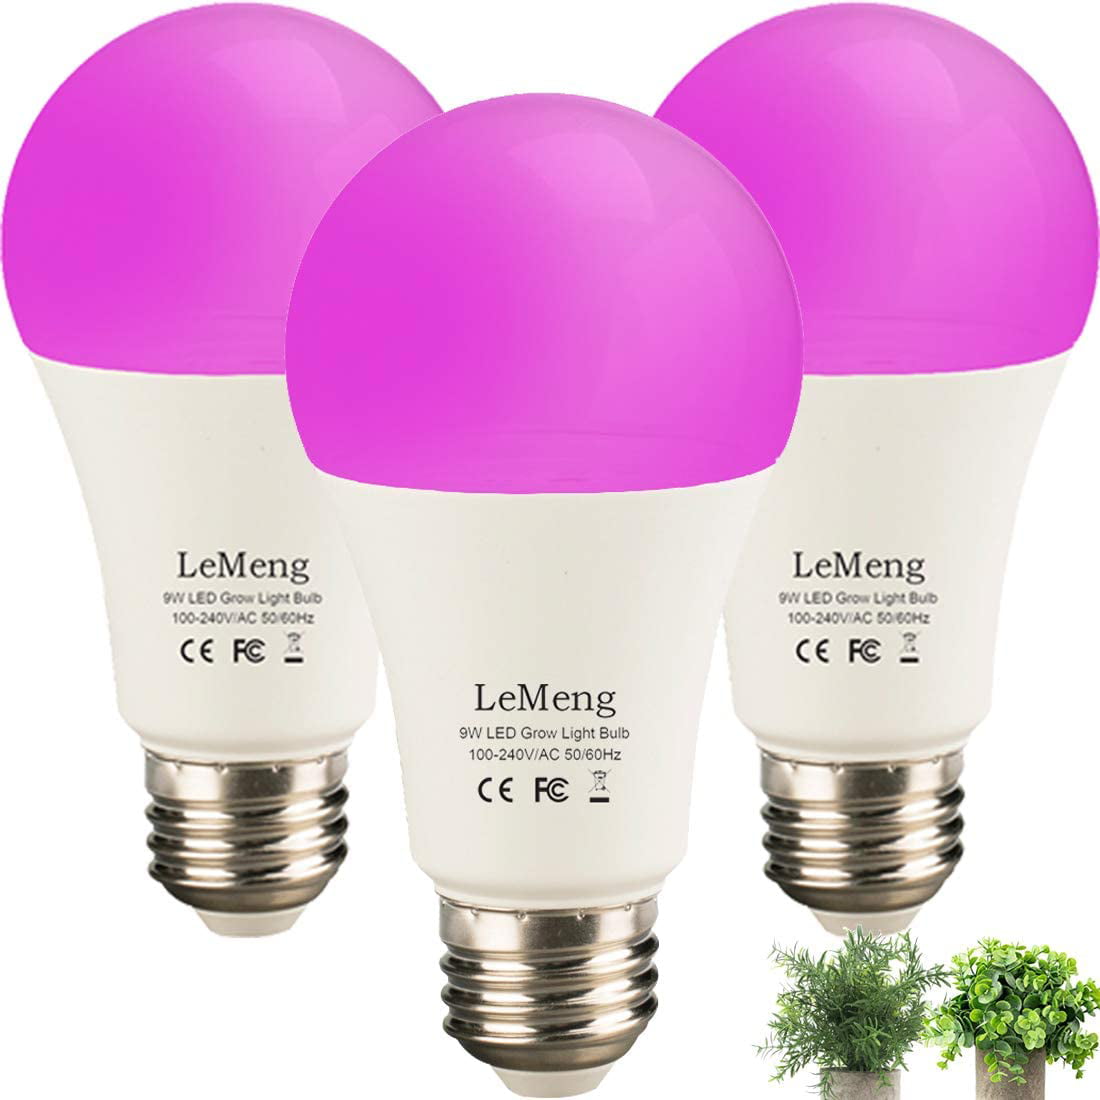 2-Pack LED Grow Light Buy One Get One Total 600W HPS & CFL Grow Lights Equival 